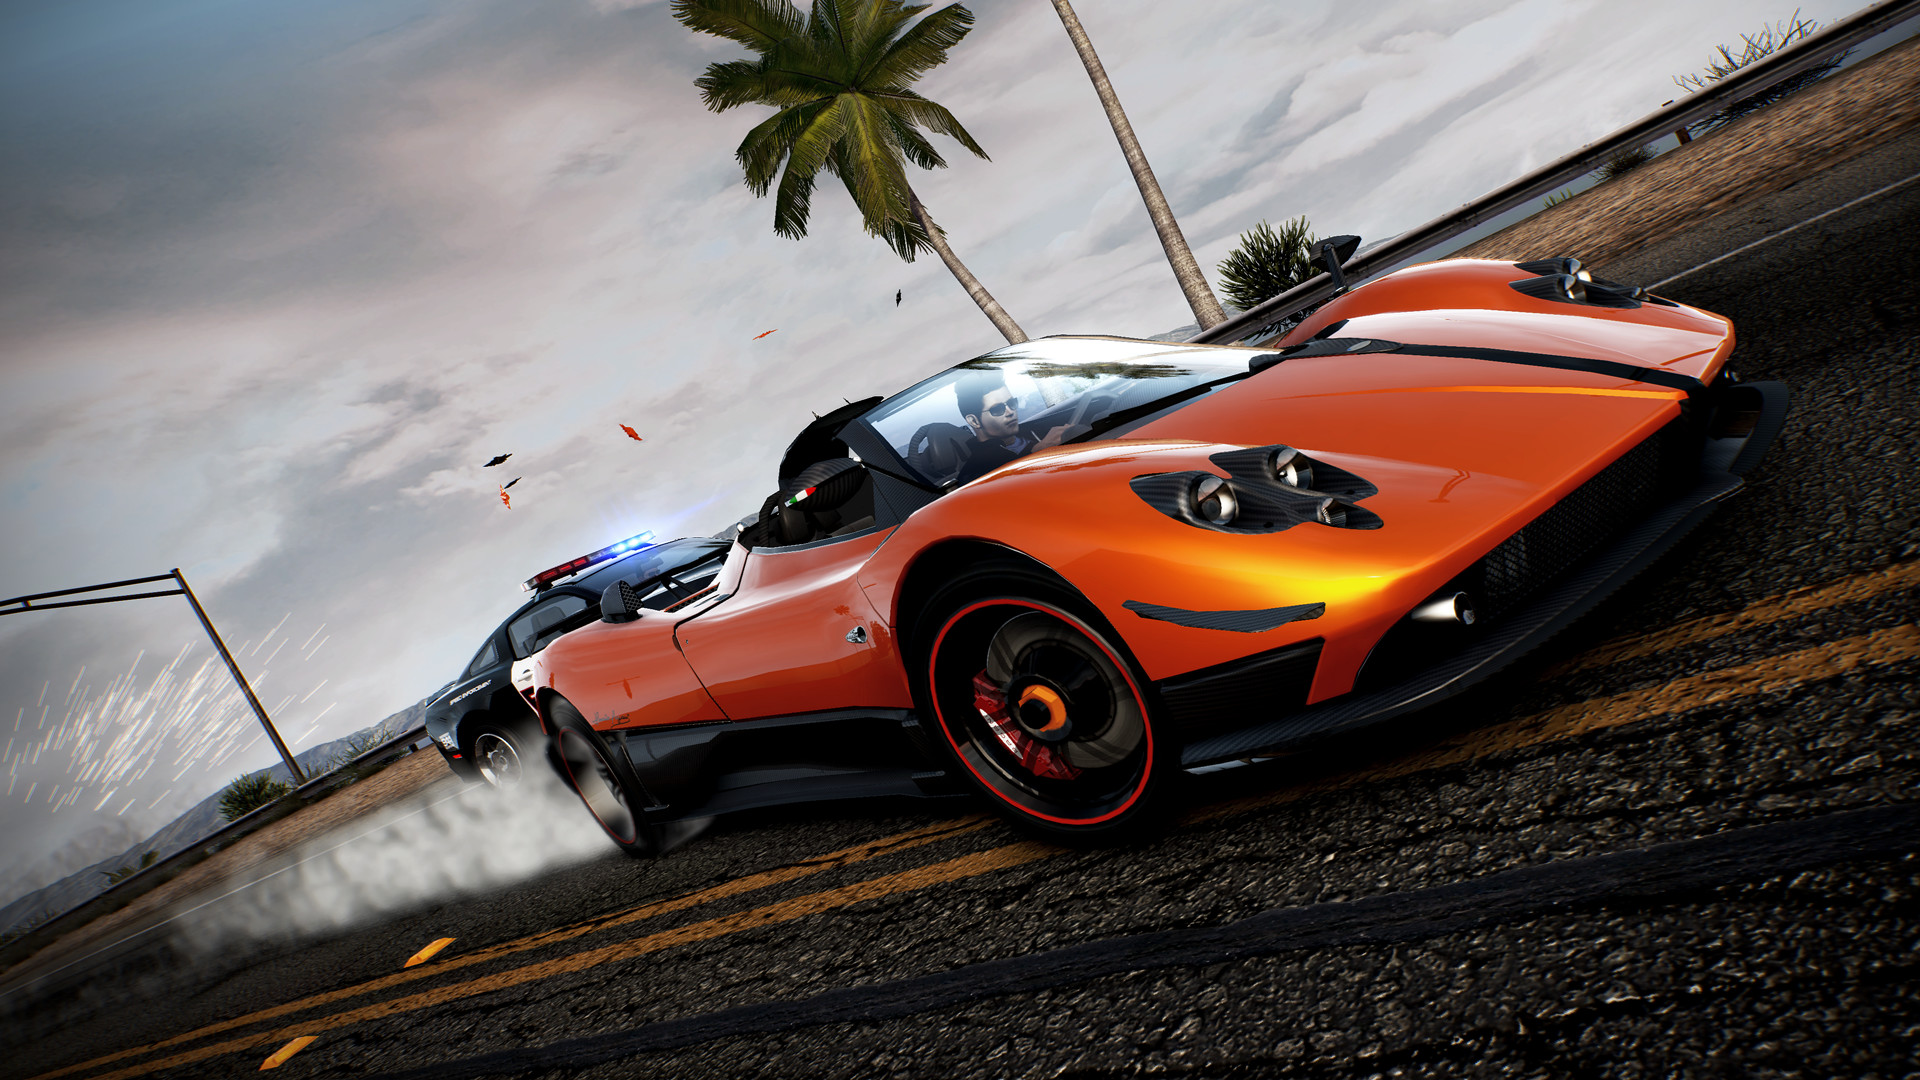 The Next Need for Speed Game Could be in Serious Trouble